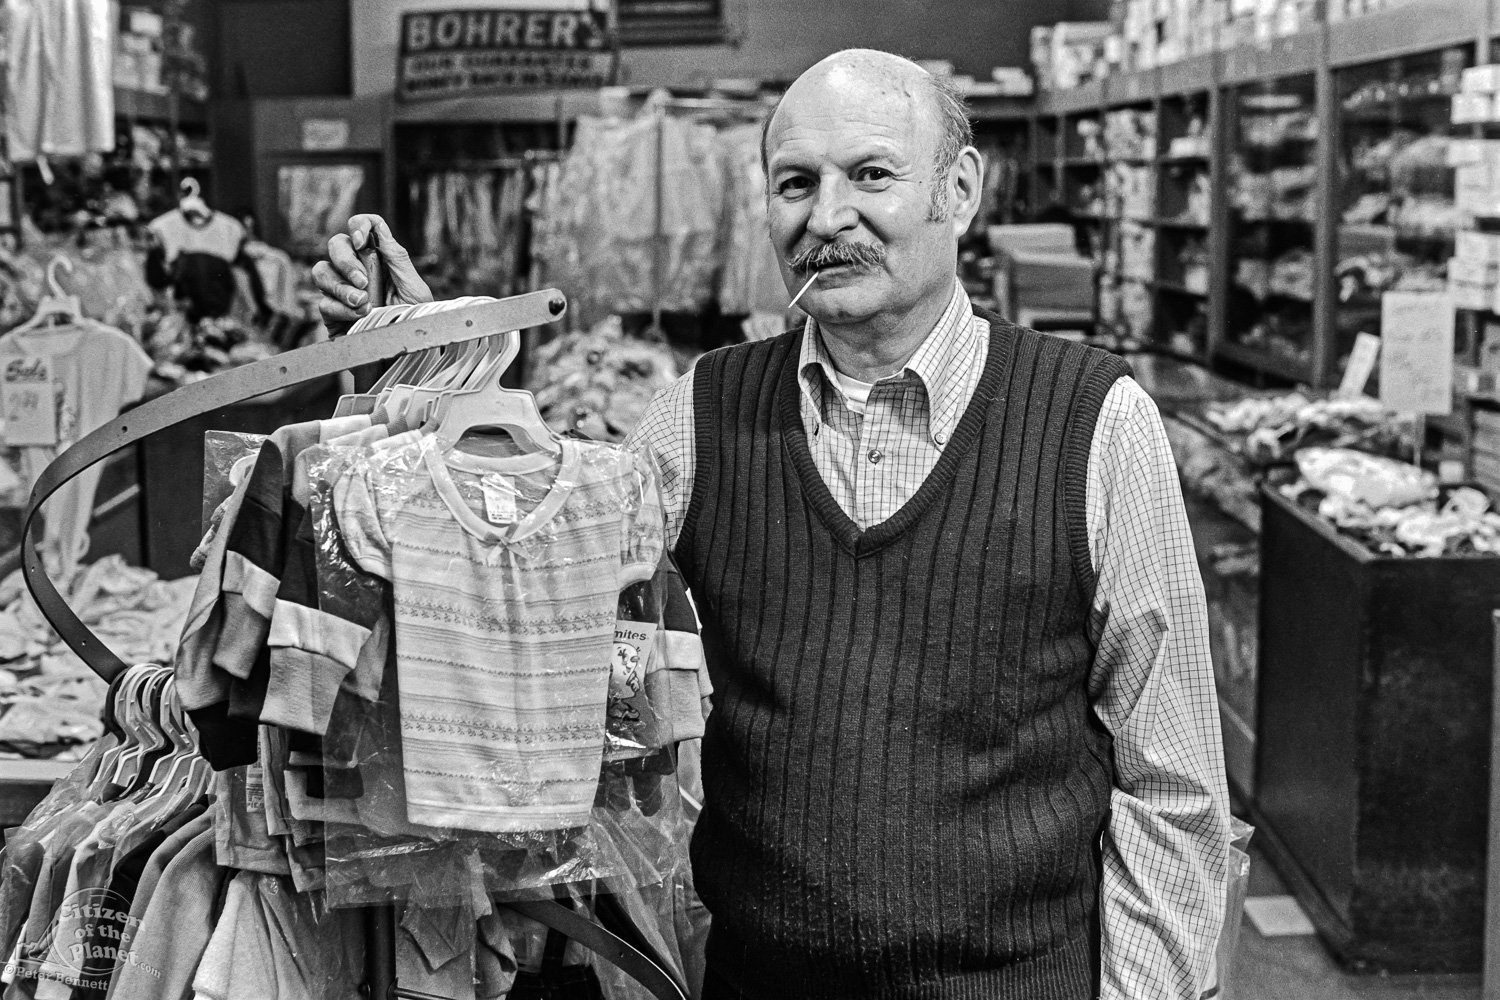  Harry Bohrer in his store, 1st Avenue 